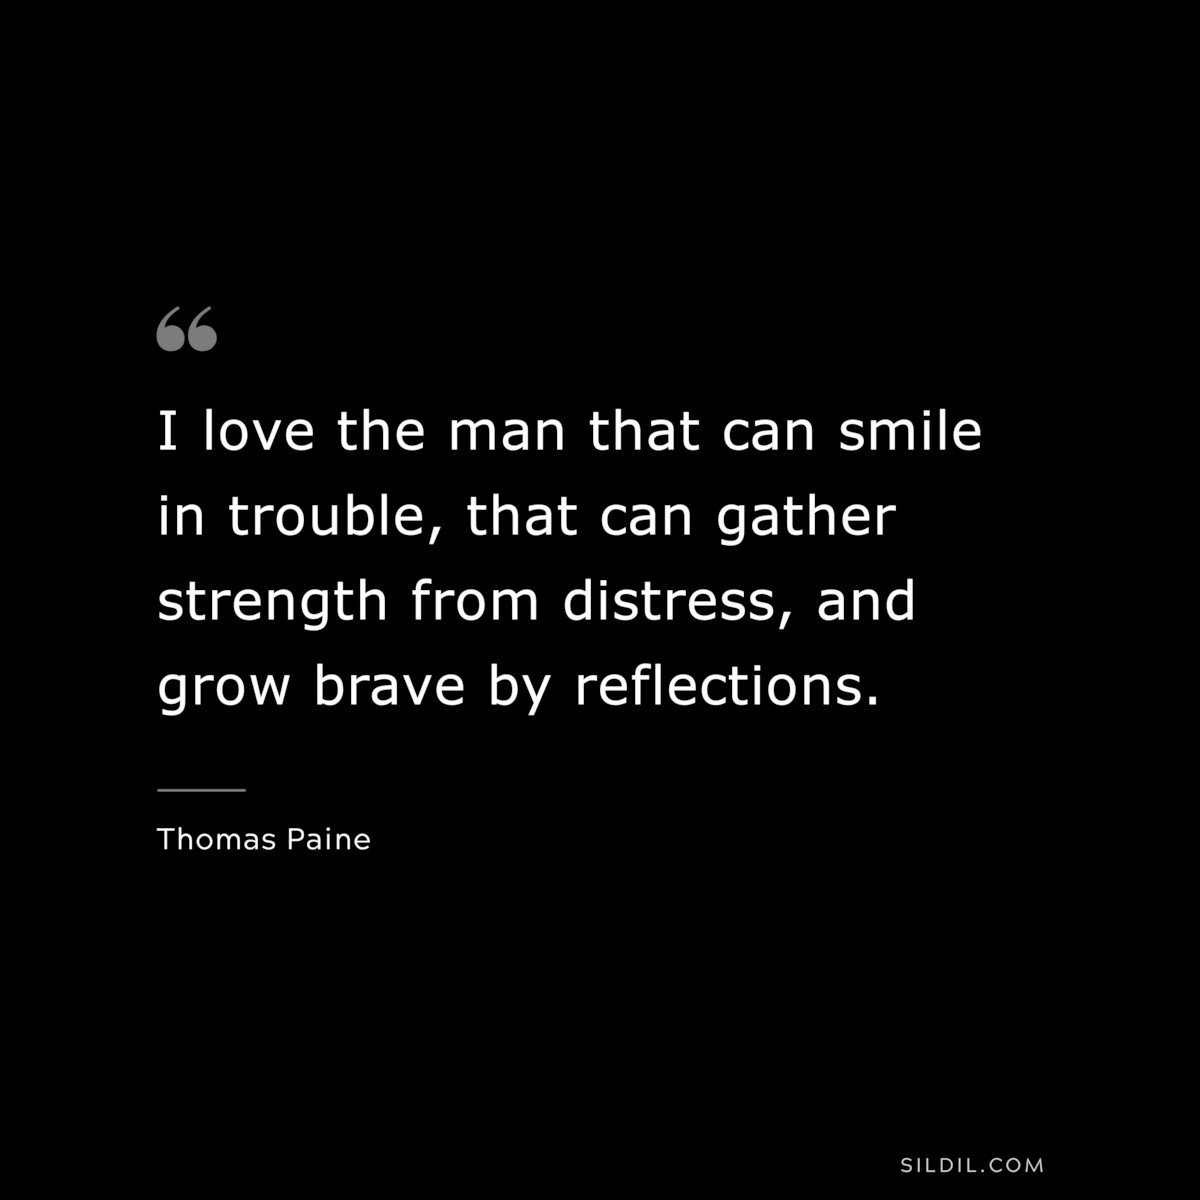 I love the man that can smile in trouble, that can gather strength from distress, and grow brave by reflections. ― Thomas Paine